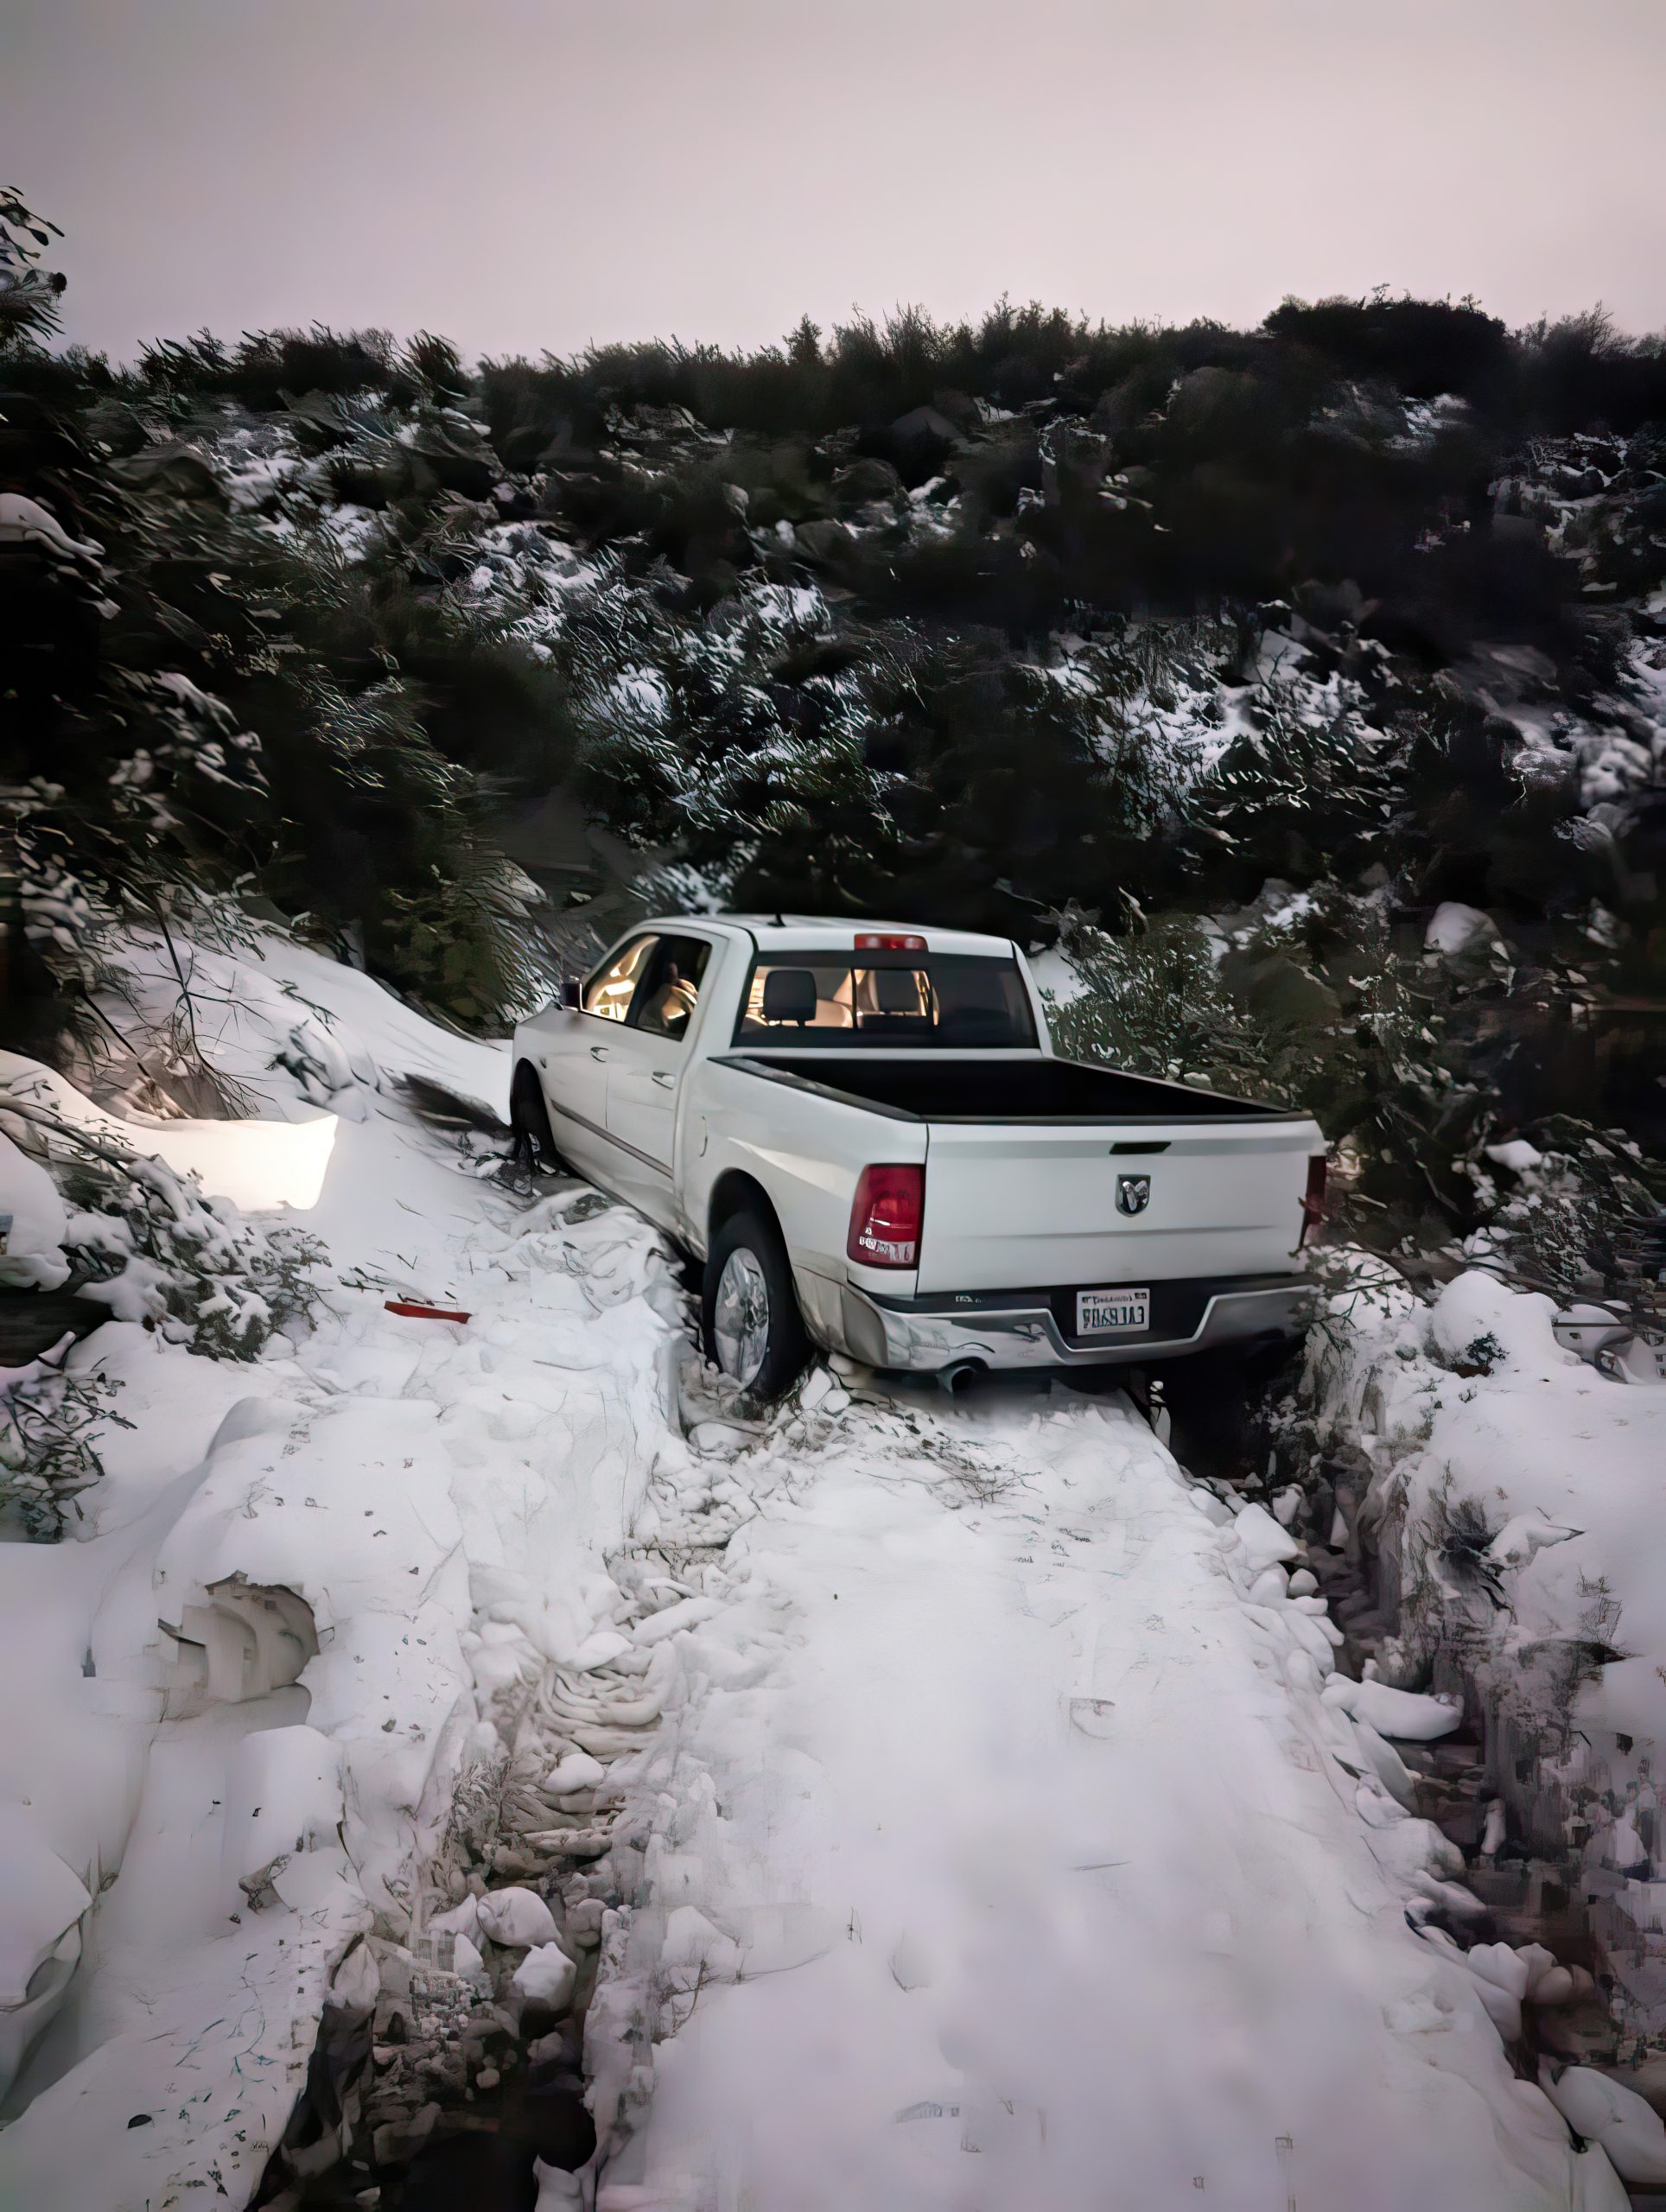 ram 1500 stuck in snow needing an off-road recovery